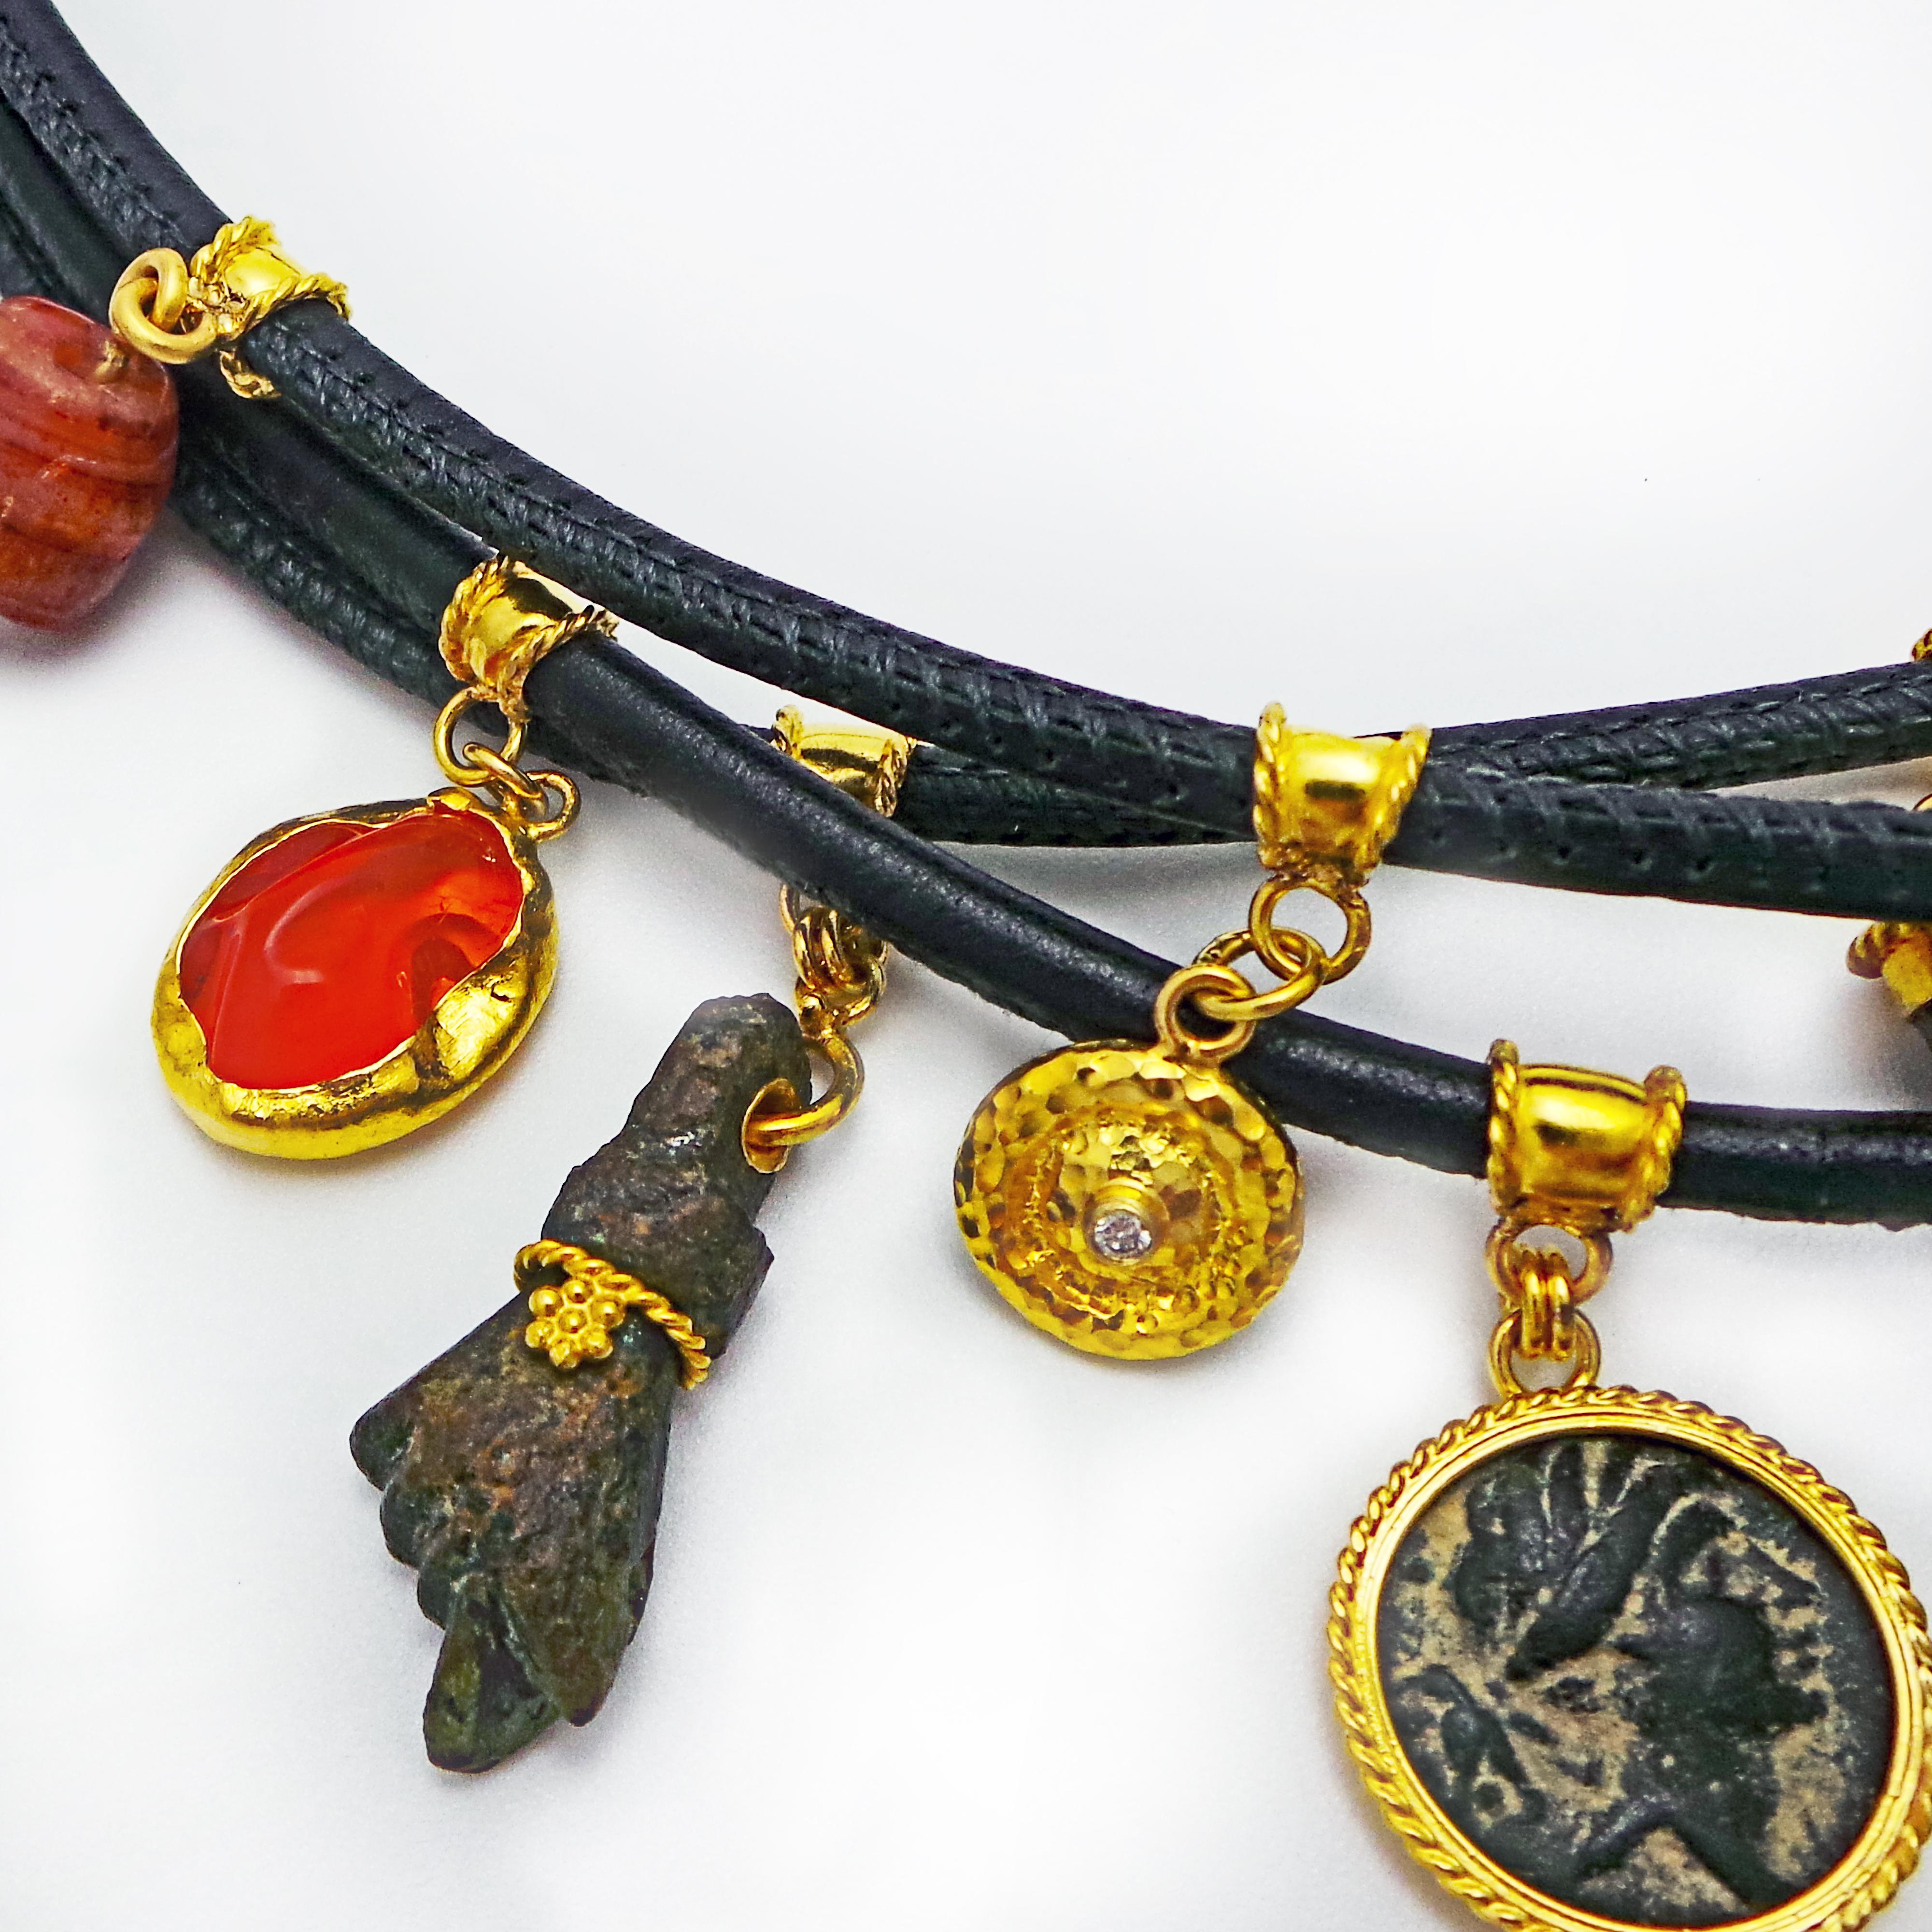 Bohemian 3-strand black, round-stitched leather necklace with ancient Roman bronze artifacts, ancient chalcedony and agate beads, Mexican fire opal, solid 22k yellow gold Ixthus charm, and hammered 22k gold and diamond charm. Ancient Roman bronze